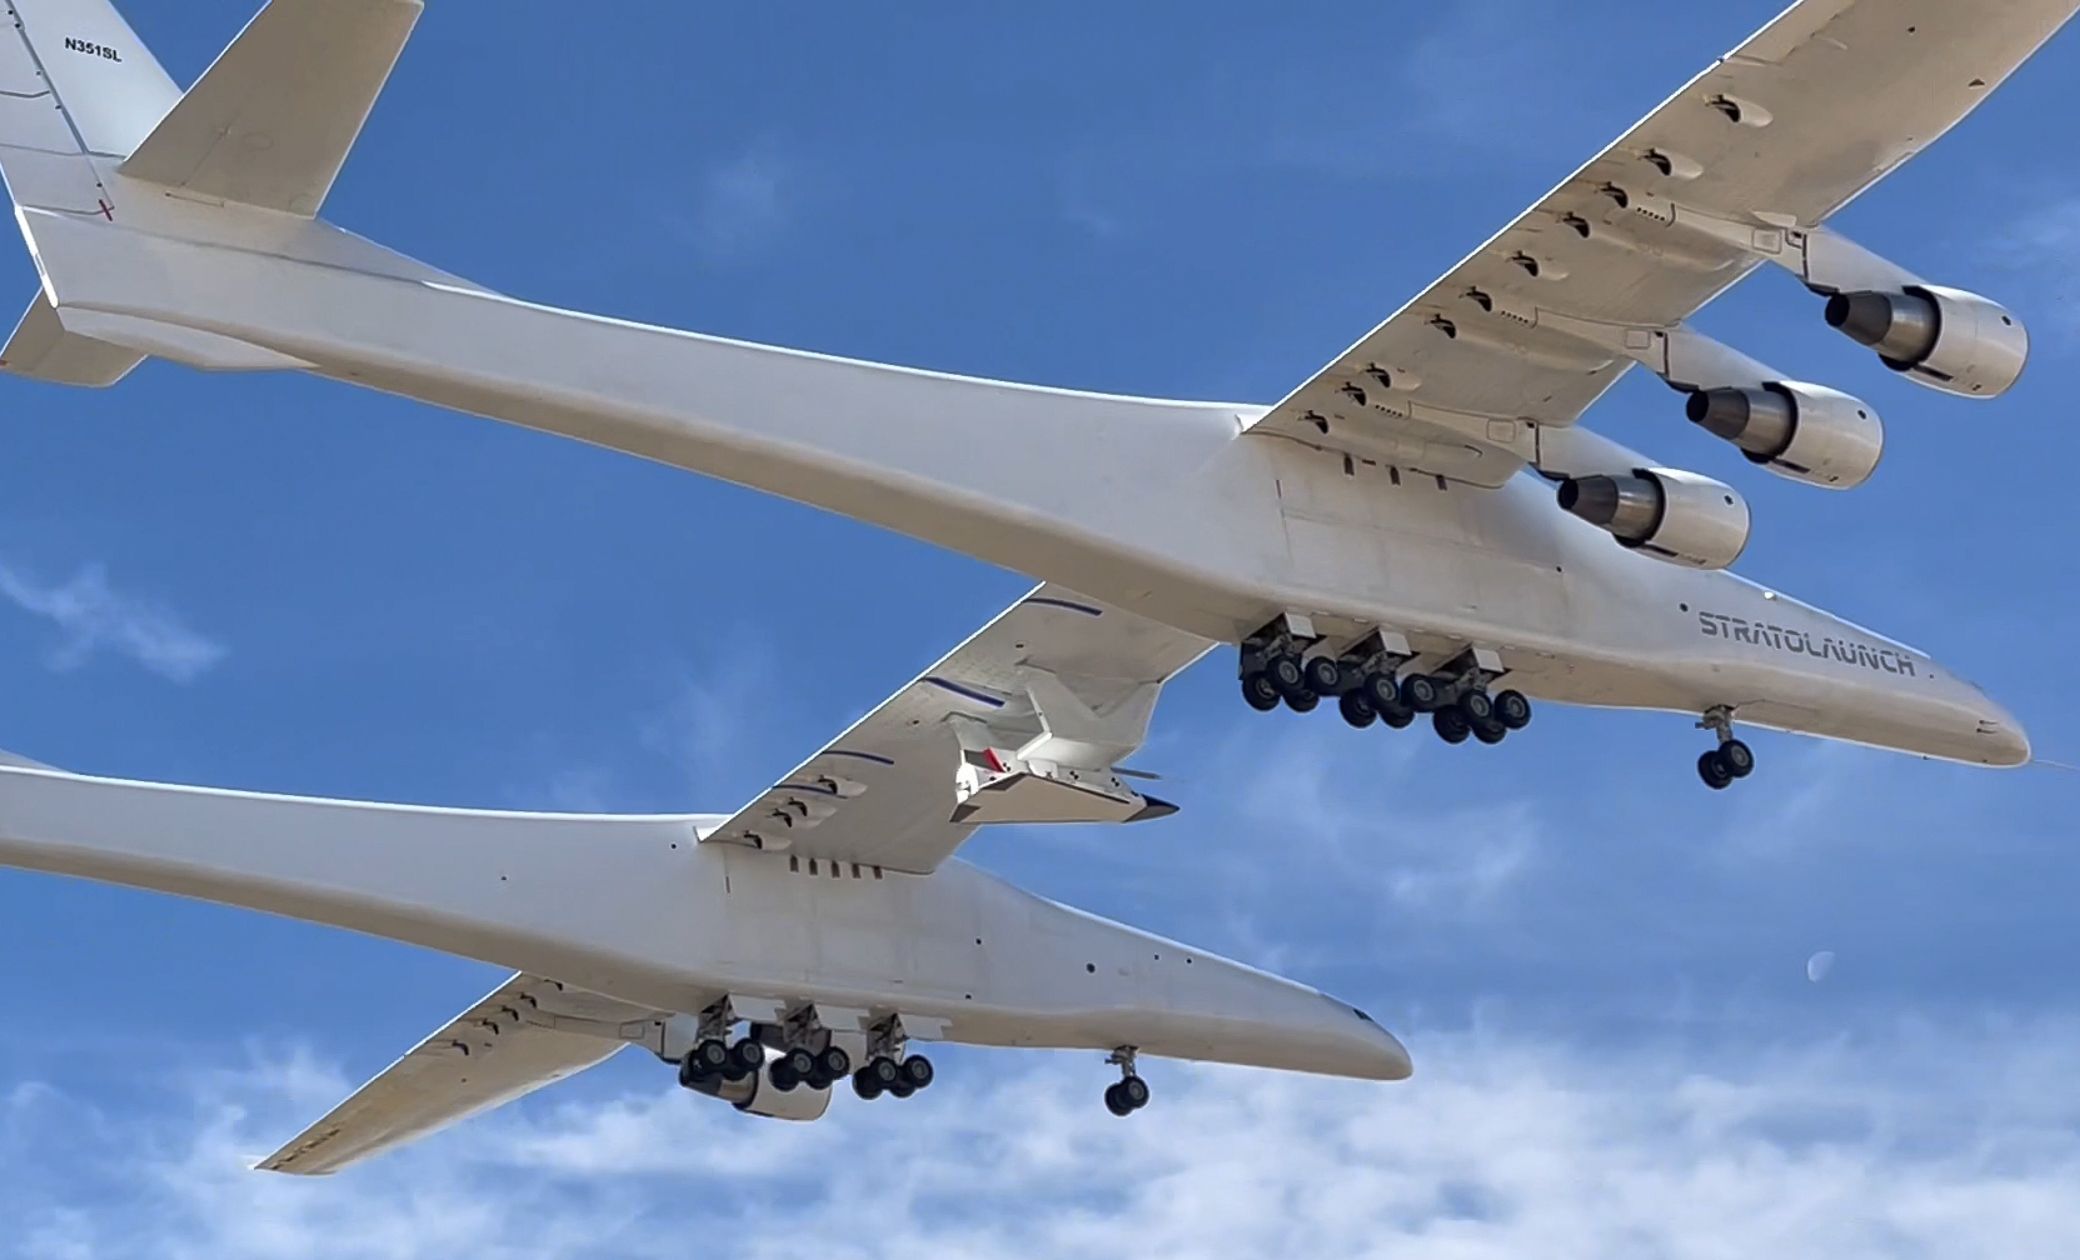 Stratolaunch's Six  Engined  Launch  Platform  Roc  Successfully  Completed The  Captive  Carry  Flight  with  TA-1  Test Vehicle.